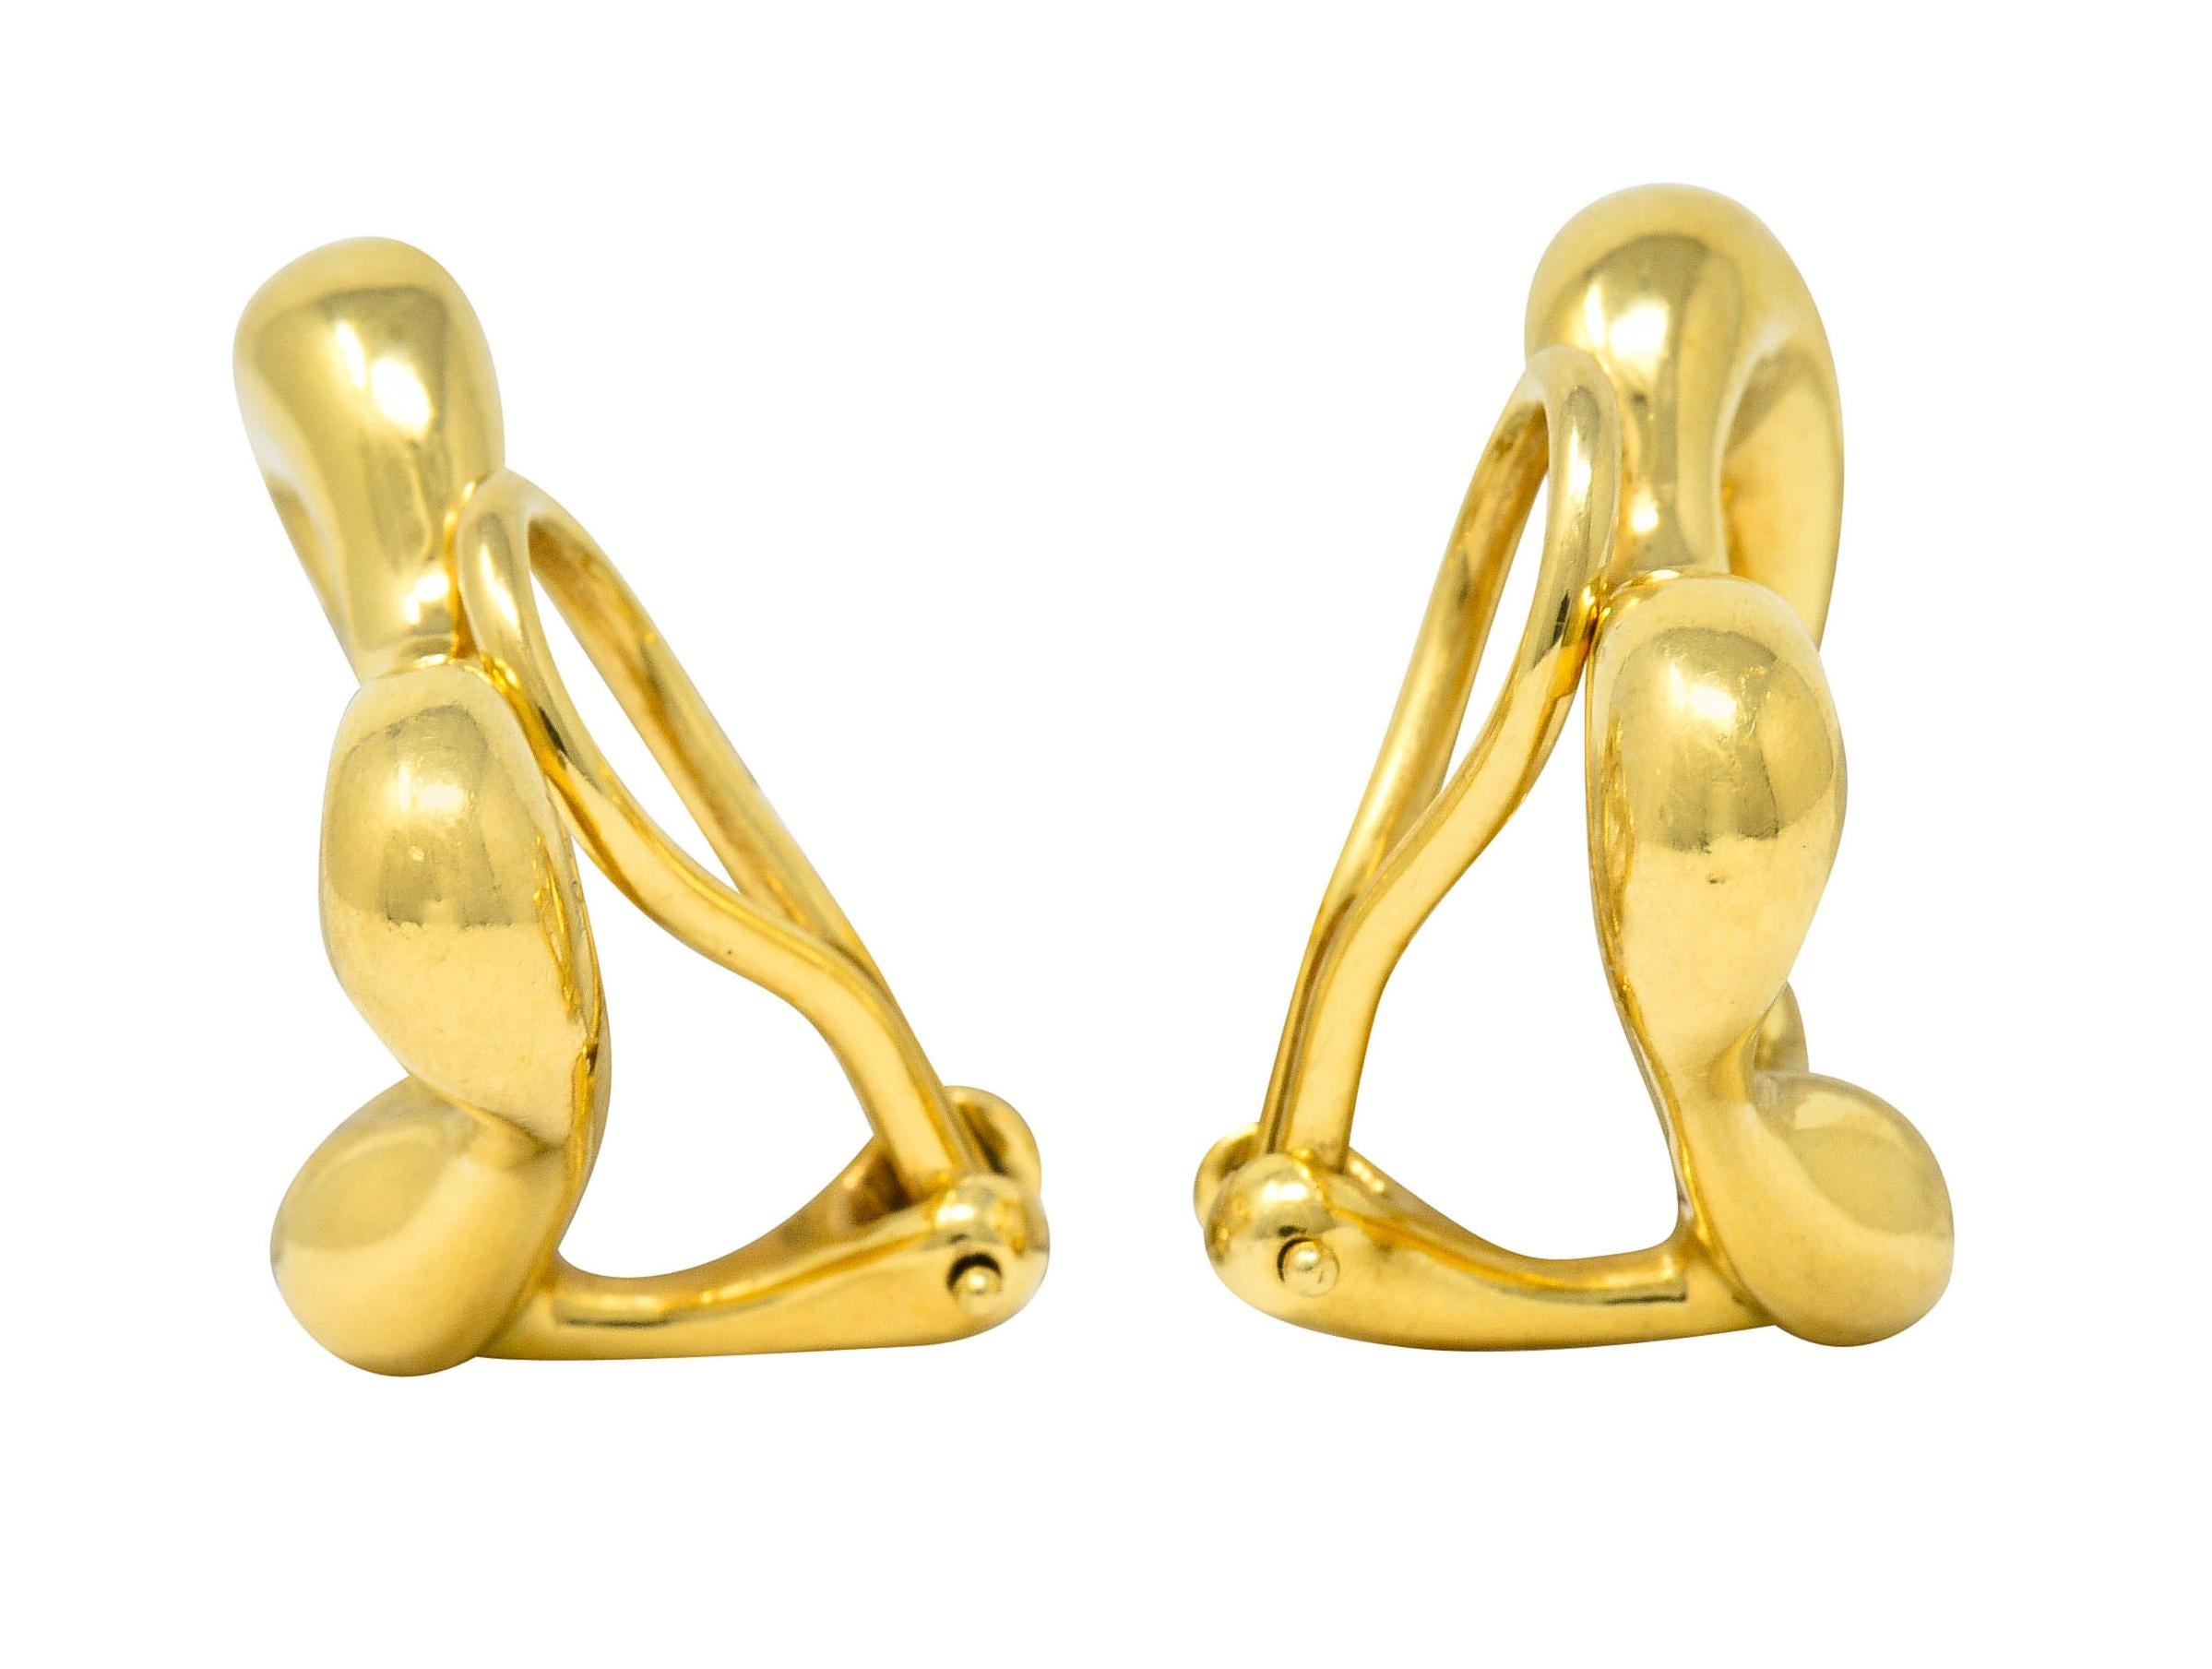 Earrings are designed as the iconic stylized open heart motif

Outline of heart graduates in width and thickness

Completed by hinged omega backs

Stamped 750 for 18 karat gold

Fully signed Elsa Peretti Tiffany & Co.

From the Open Hearts